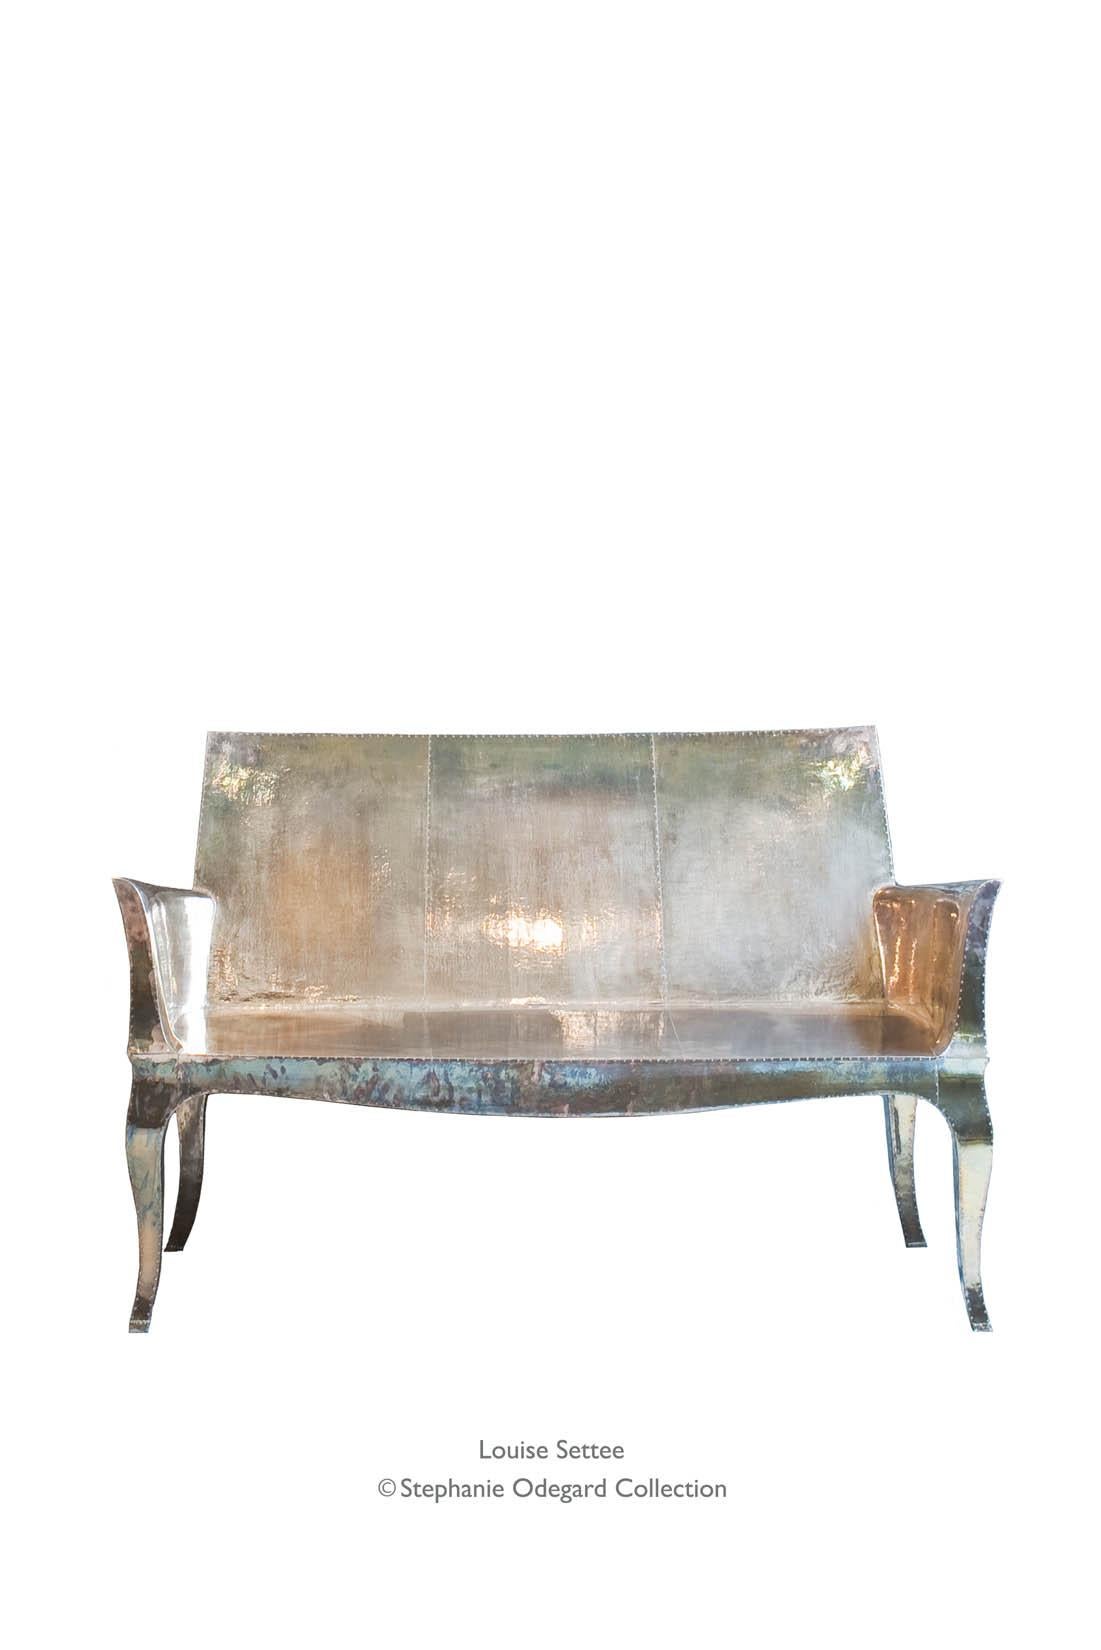 Louise Settee Art Deco Living Room Sets in Fine Hammered Copper by Paul Mathieu For Sale 6